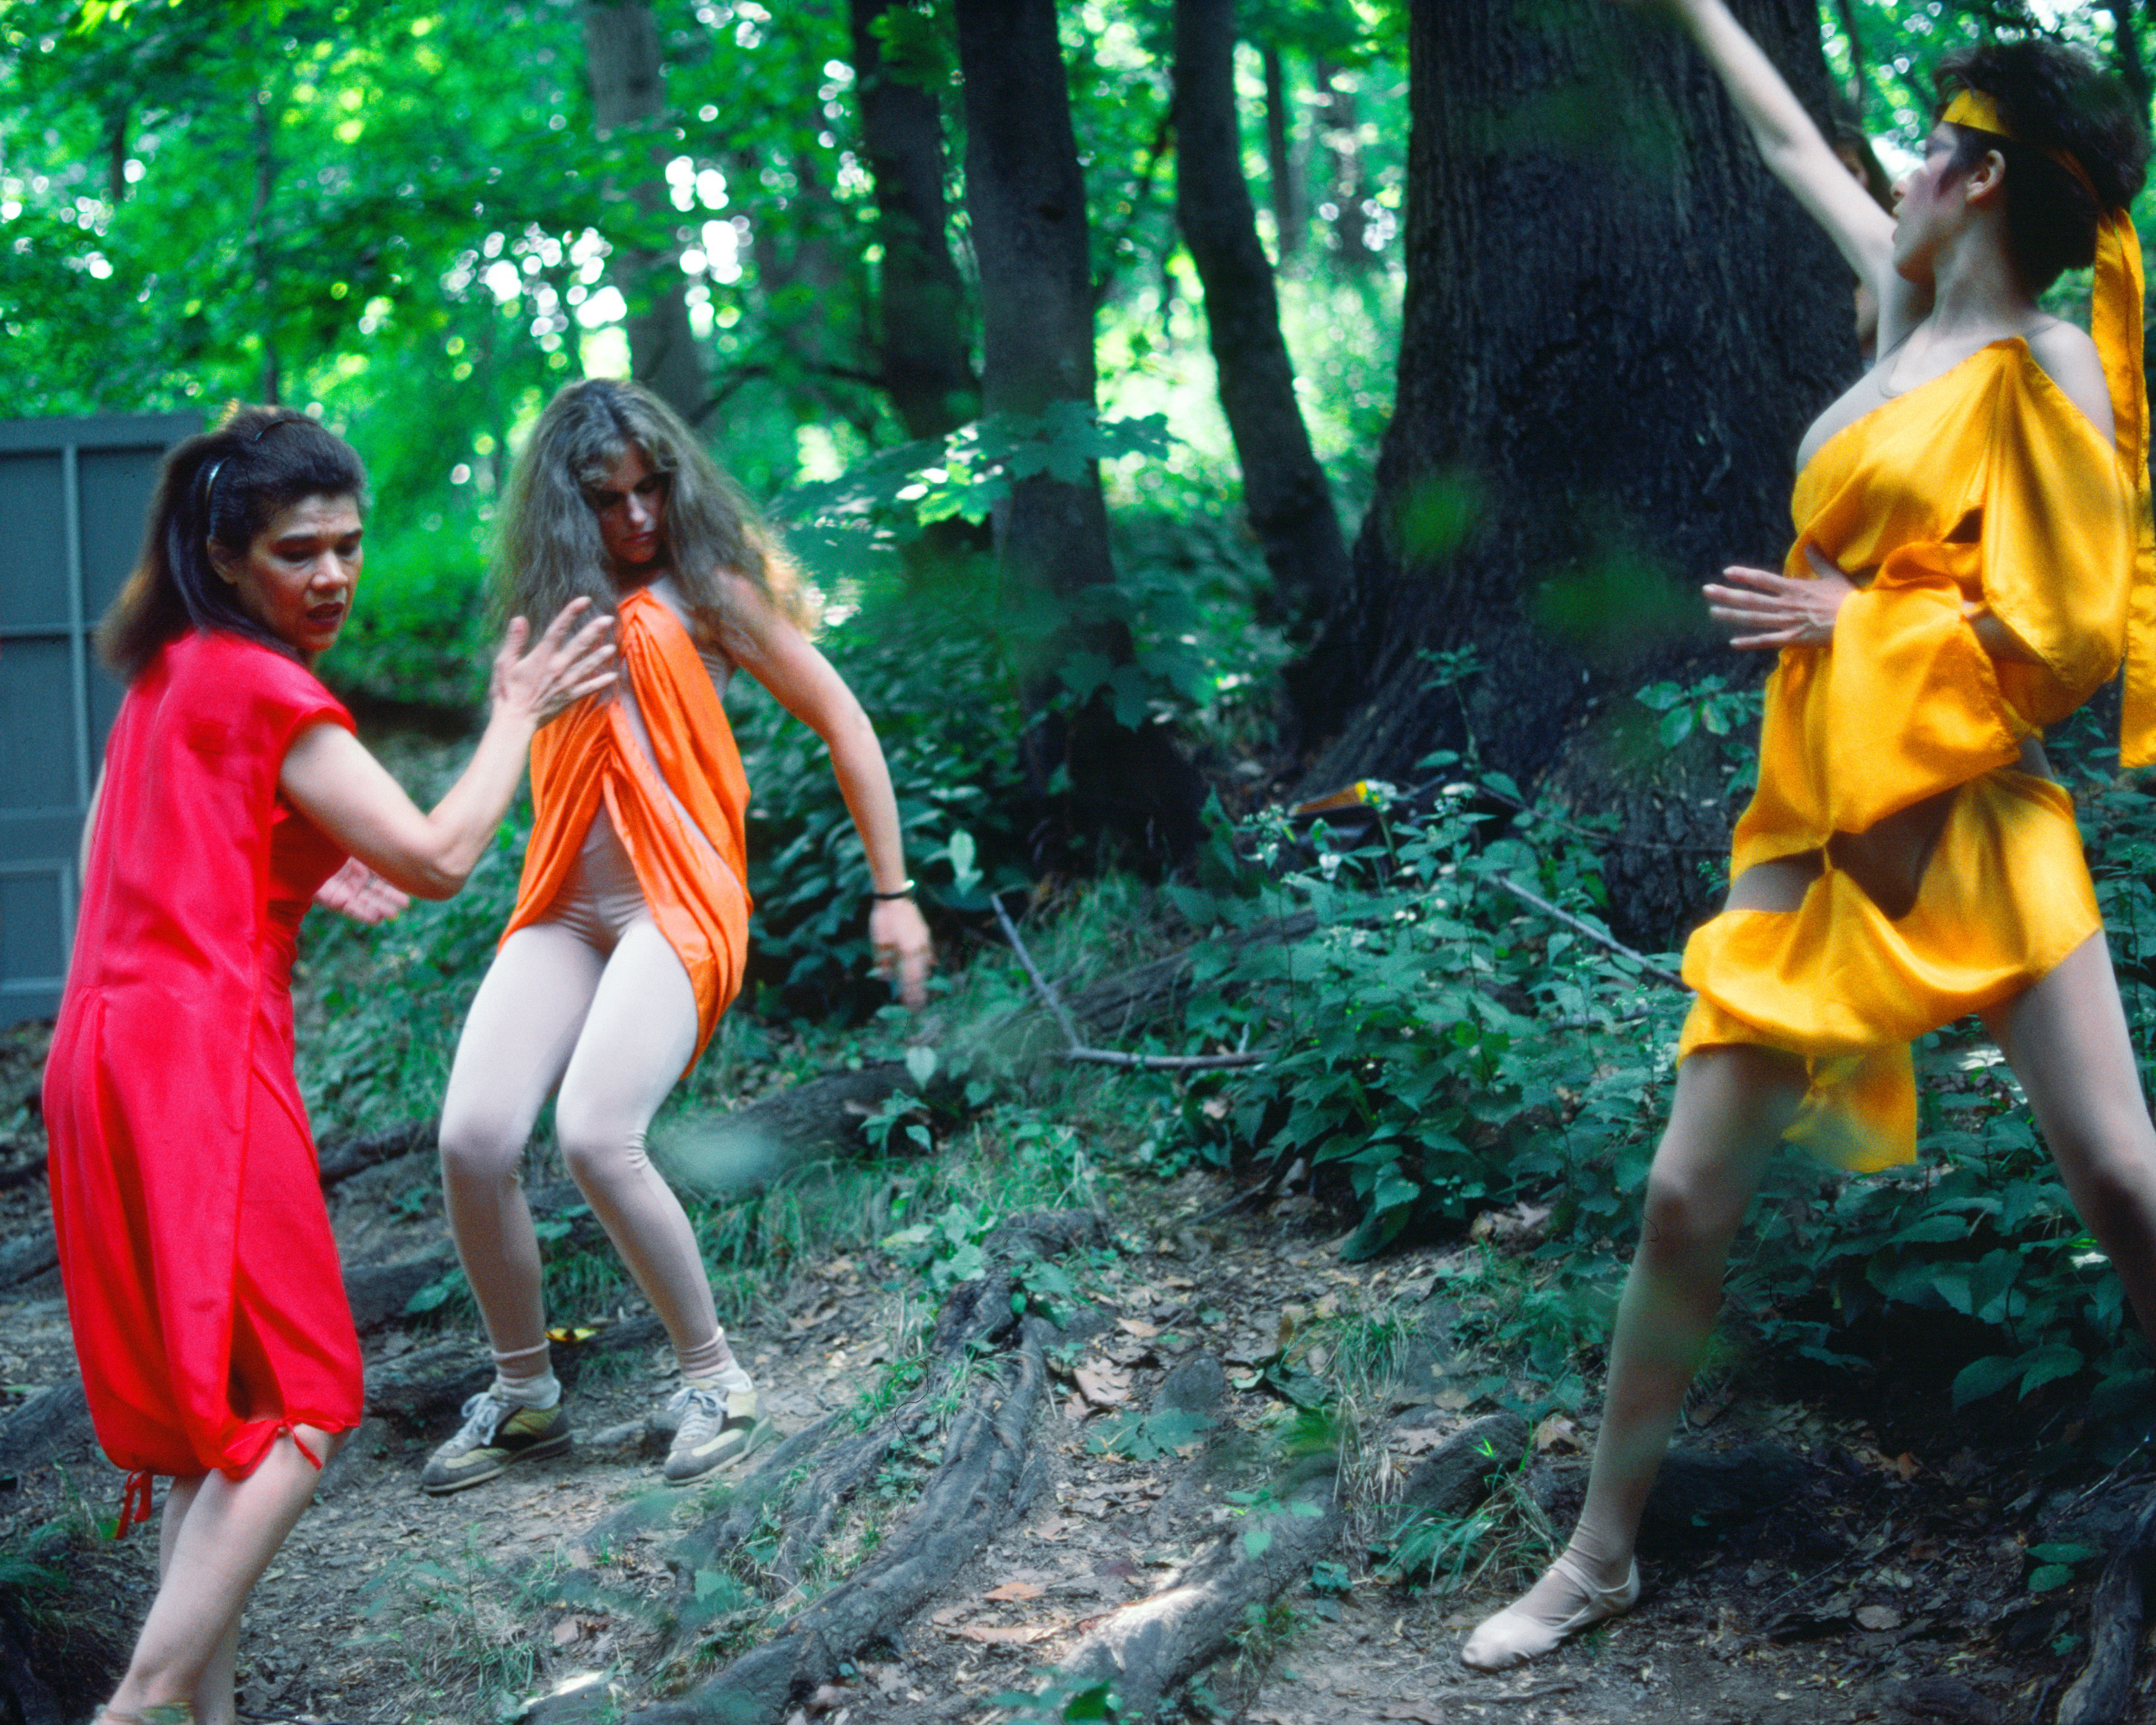 Rivers, First Draft: The Debauchees ignore the Woman in Red, 1982/2015, Digital C-print from Kodachrome 35mm slides in 48 parts, 16h x 20w in (40.64h x 50.80w cm)